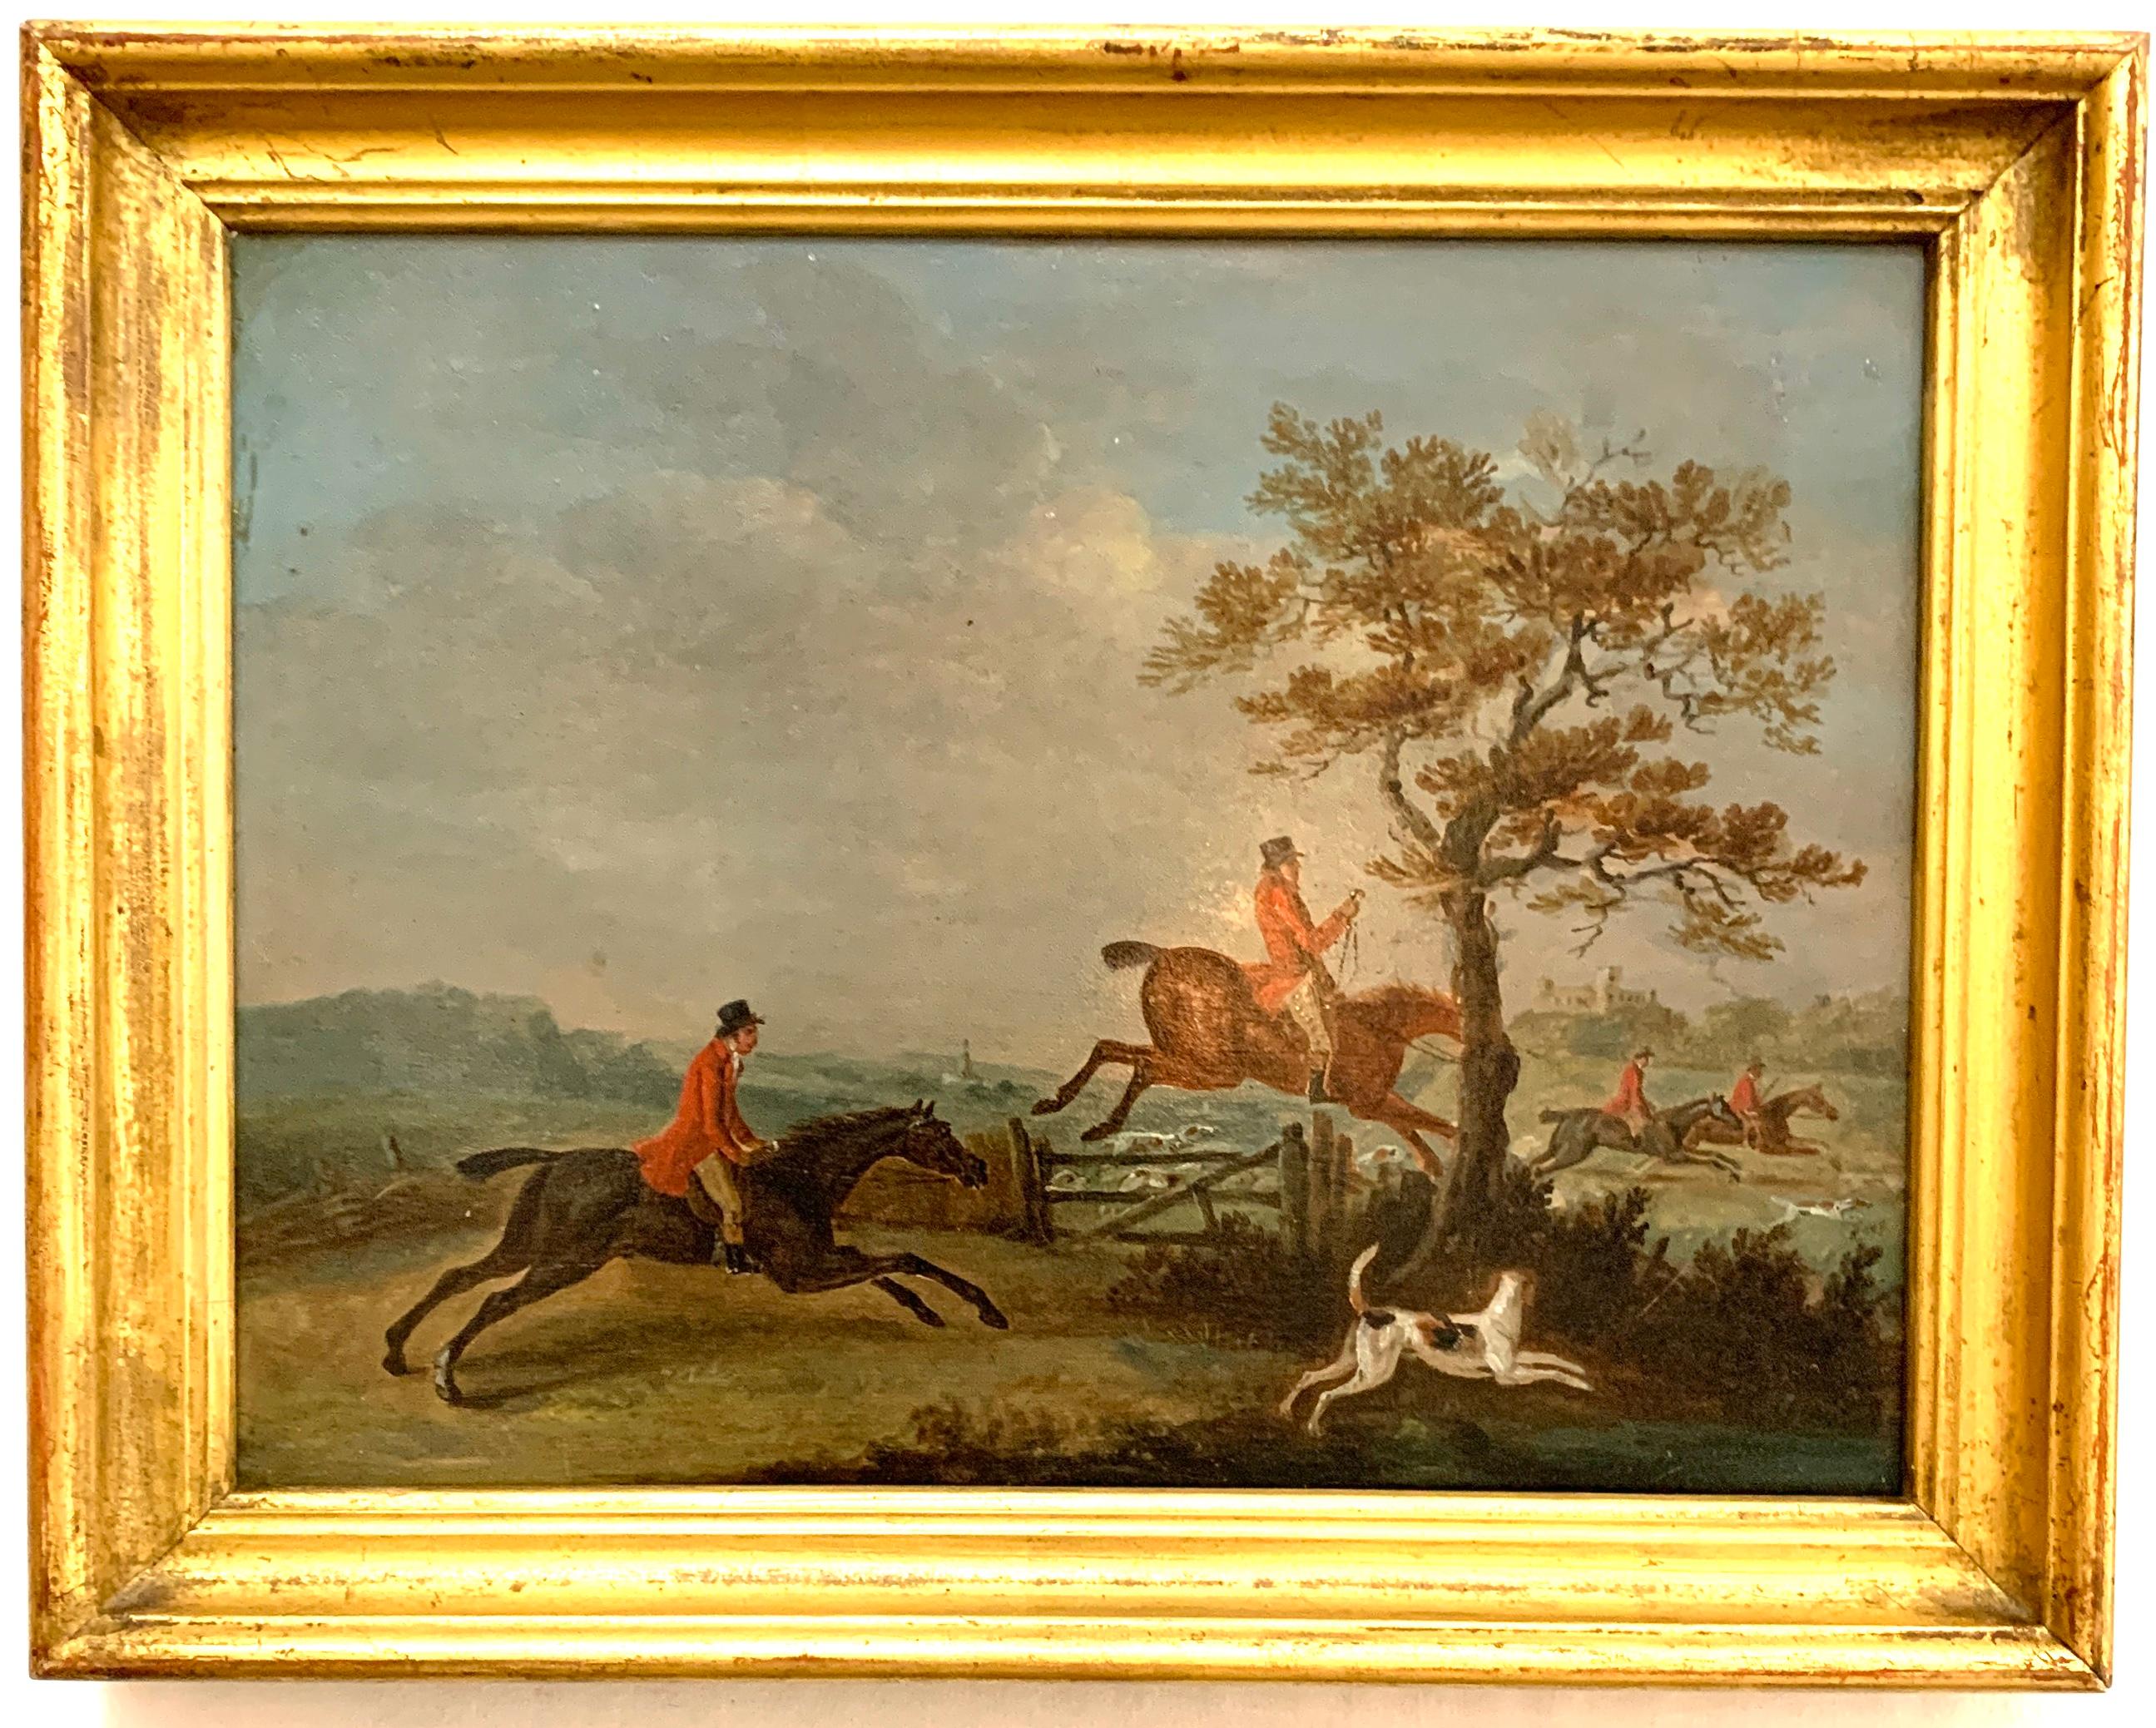 Set of 4 early 19th century Fox hunting landscape with men in red upon horseback - Painting by John Nost Sartorius